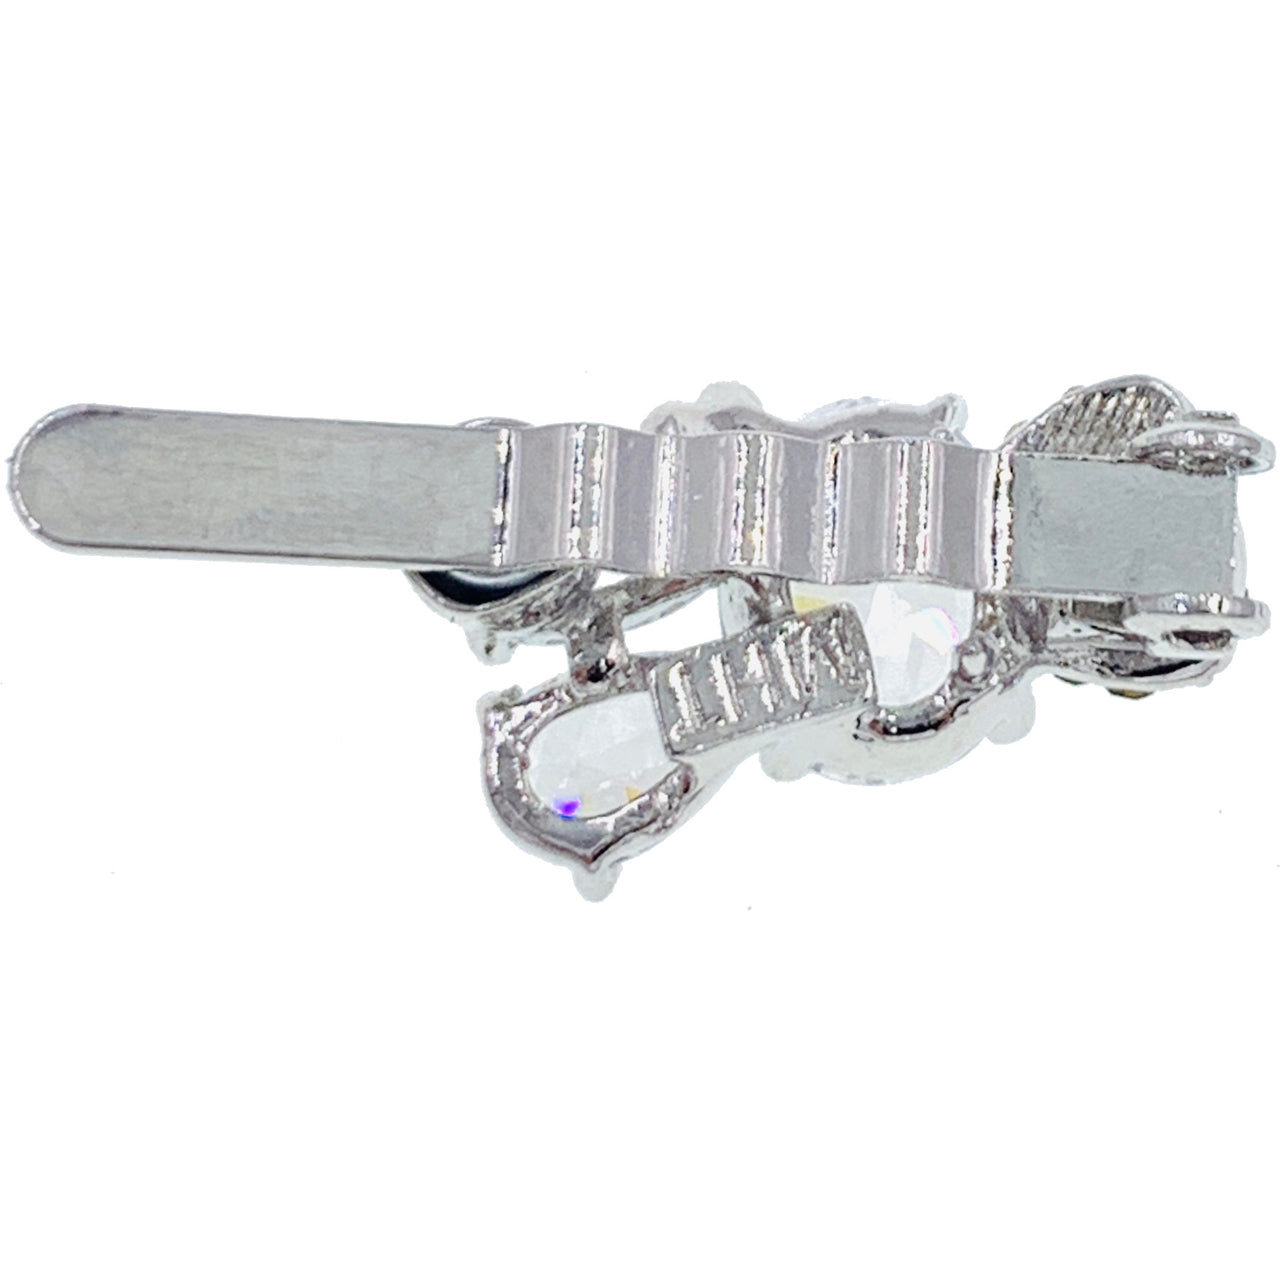 Cute Bunny Rabbit Magnetic Hair Clip Made With Swarovski & Cubic Zirconia Crystals Hairpin Small Barrette, Magnetic Clip - MOGHANT